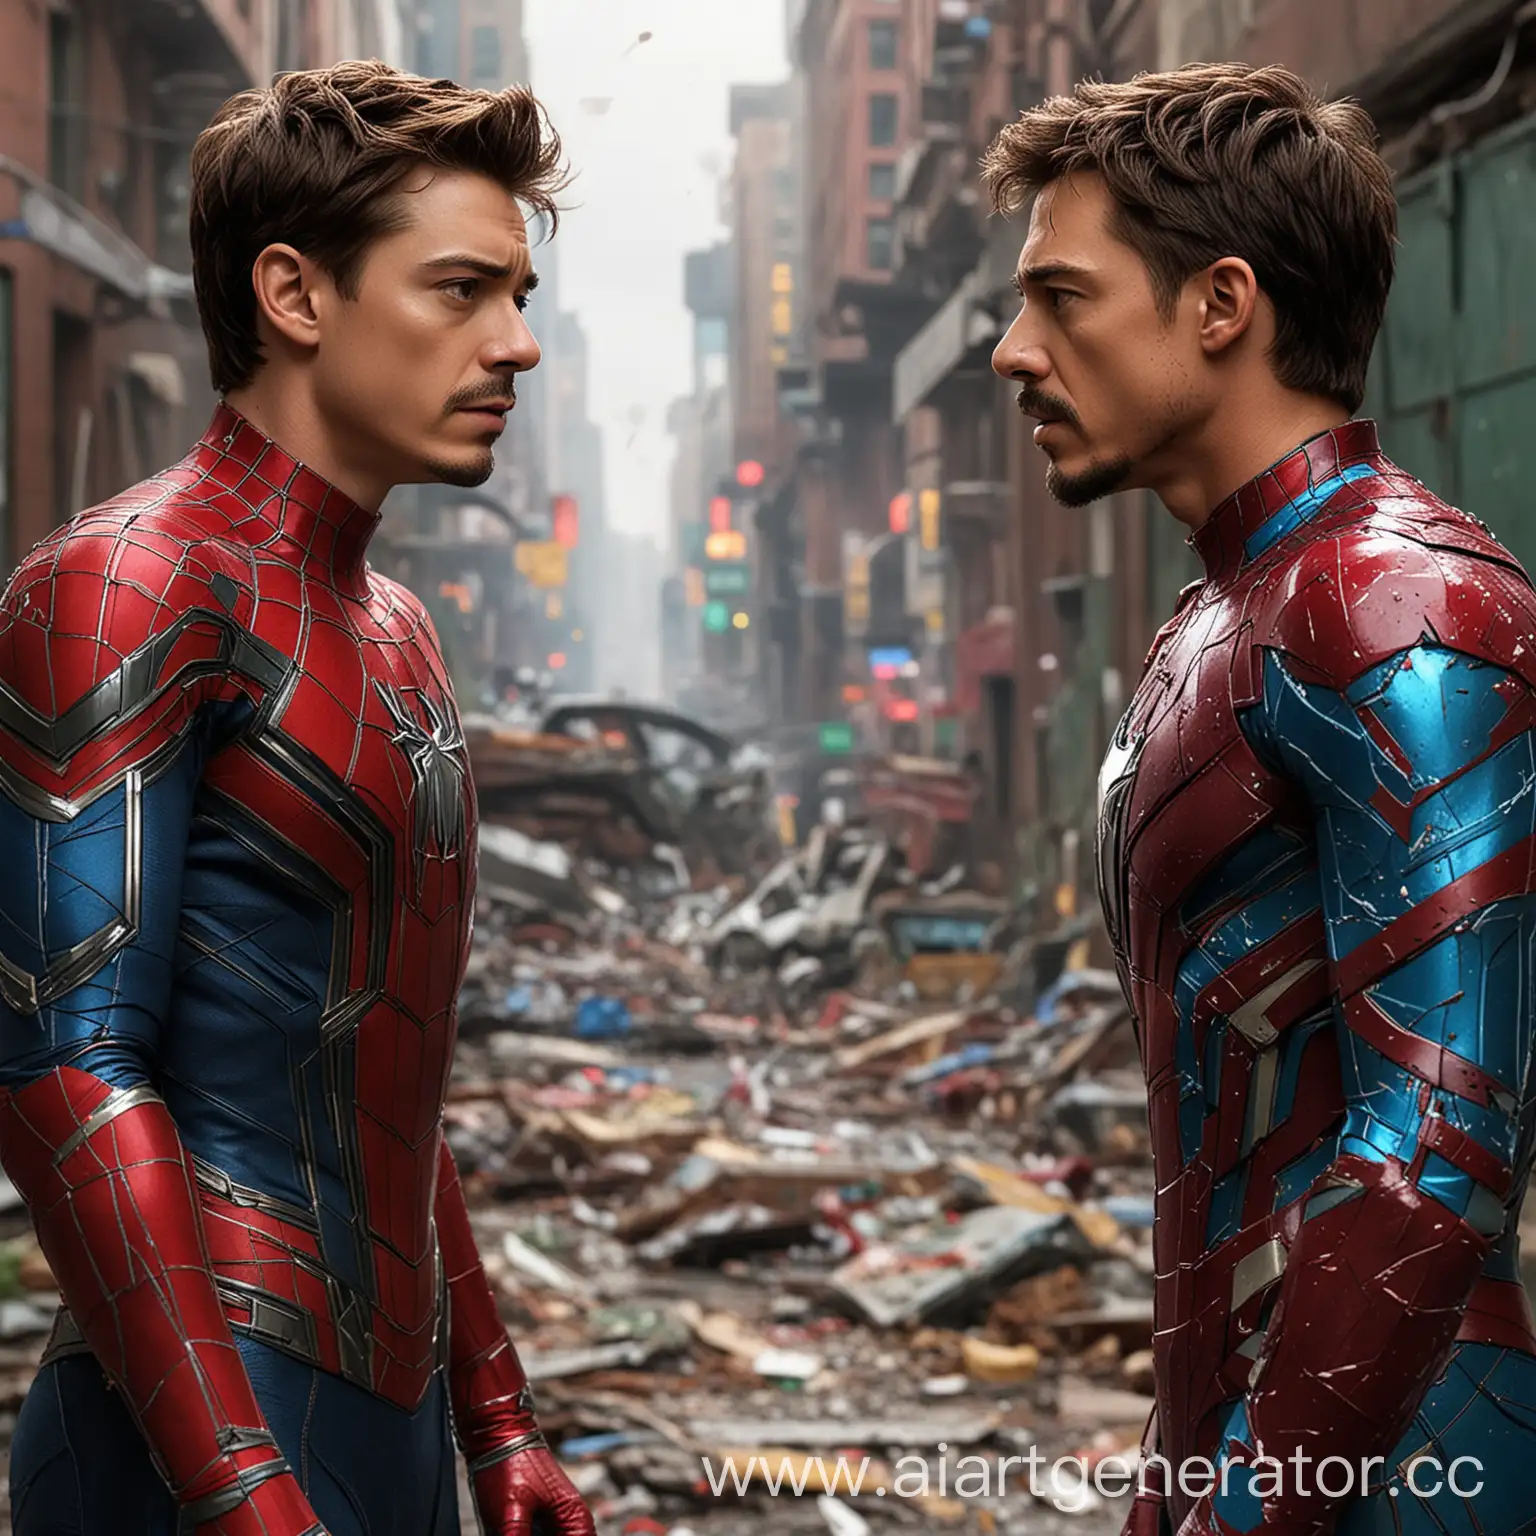 Struggling-Peter-Parker-and-Flawless-Tony-Stark-Separated-by-Vibrant-Barrier